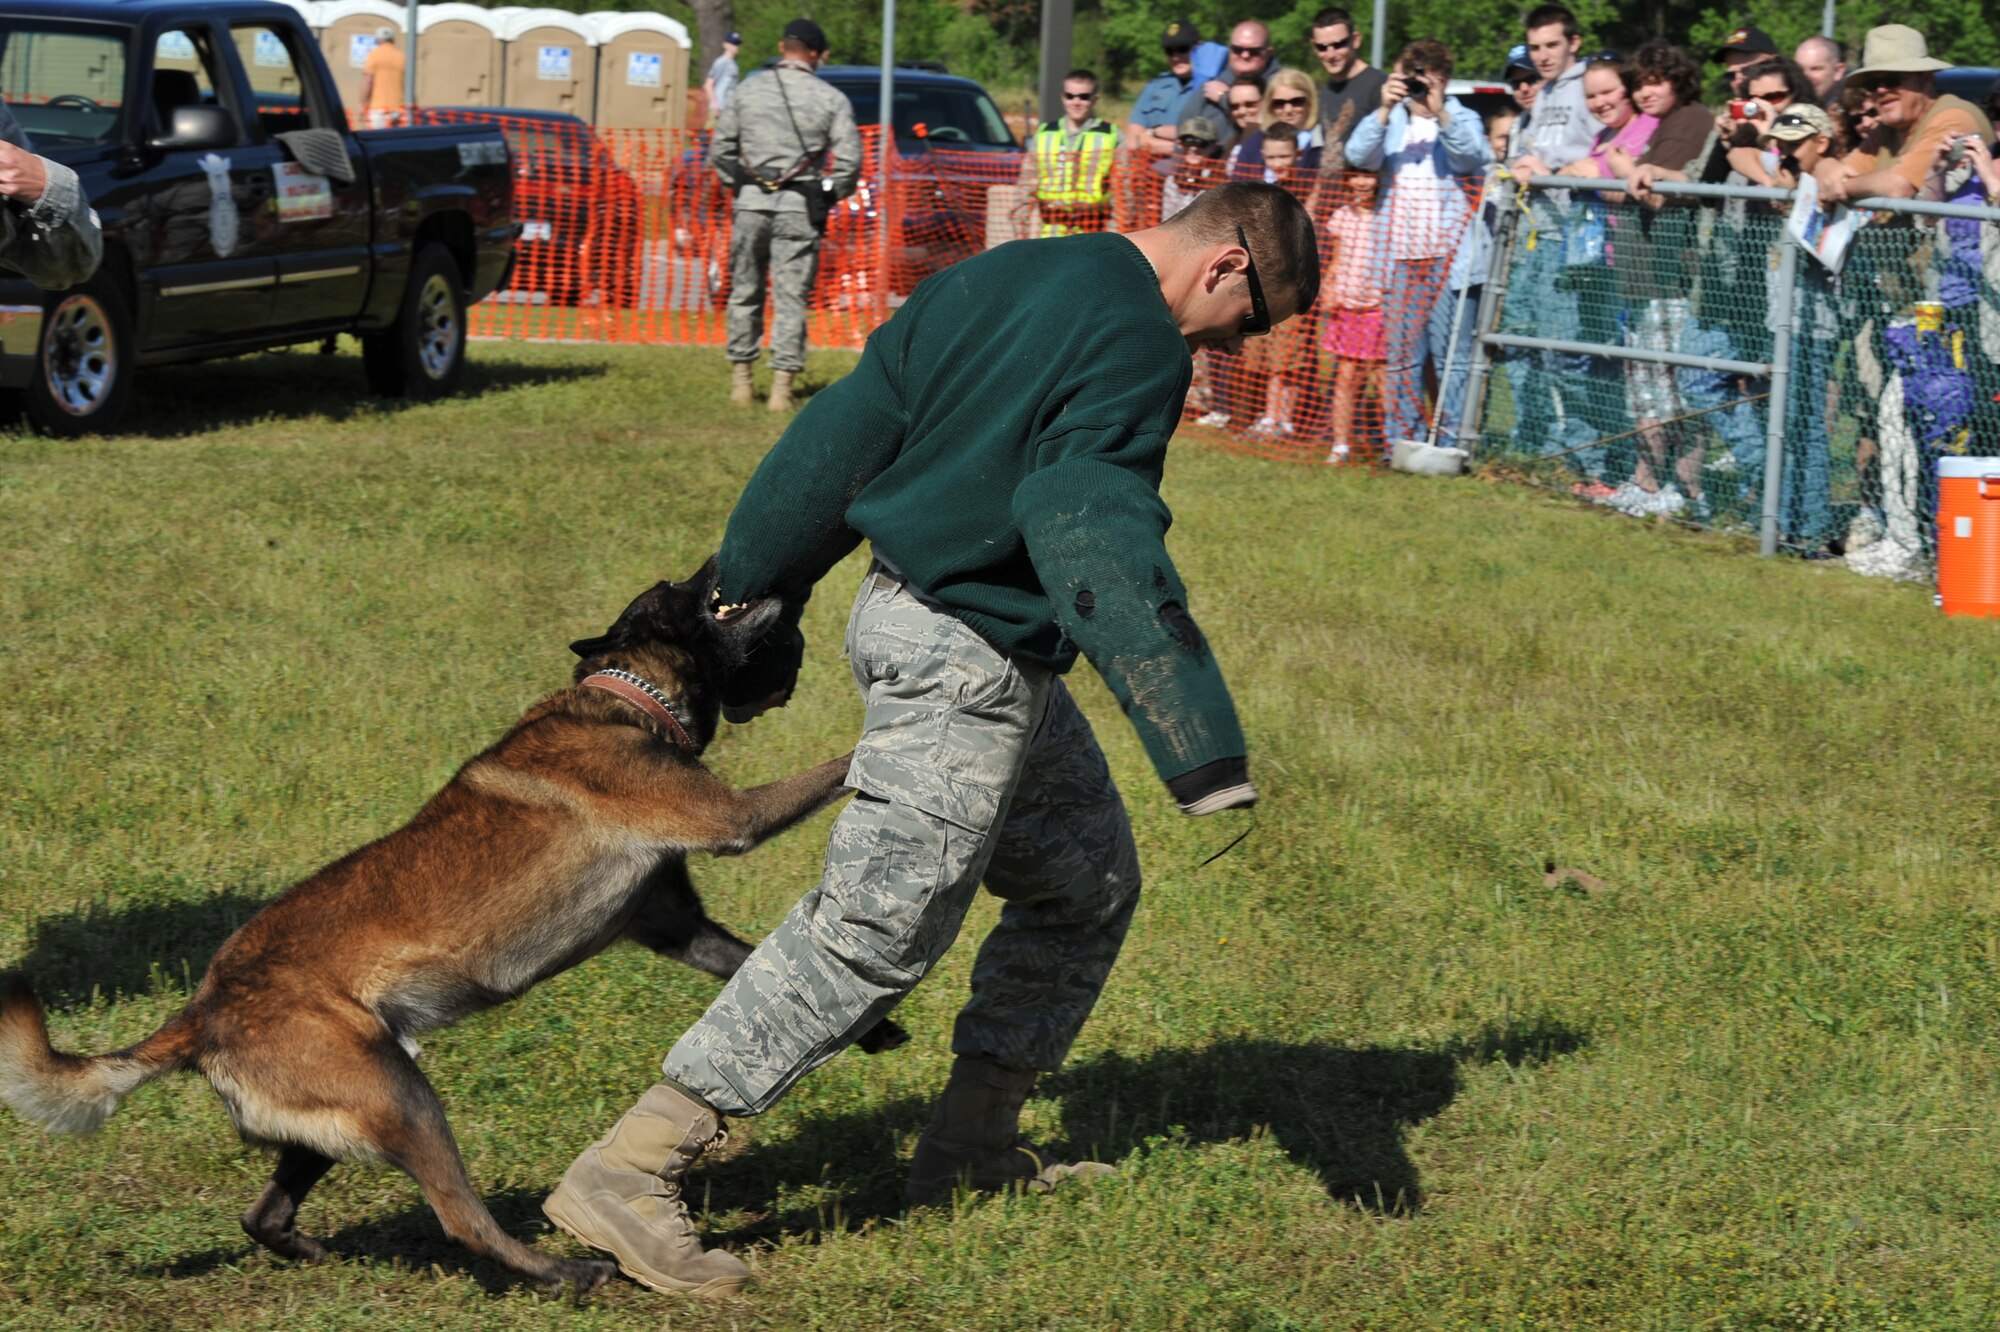 SEYMOUR JOHNSON AIR FORCE BASE, N.C. -- Senior Airman Matthew Halligan, 4th Security Forces Squadron, performs a military working dog demonstration with Ralph during the Wings Over Wayne Air Show and Open House here, April 17, 2011. Airman Halligan hails from Kendall, N.Y. (U.S. Air Force photo/Senior Airman Whitney Lambert) (RELEASED)